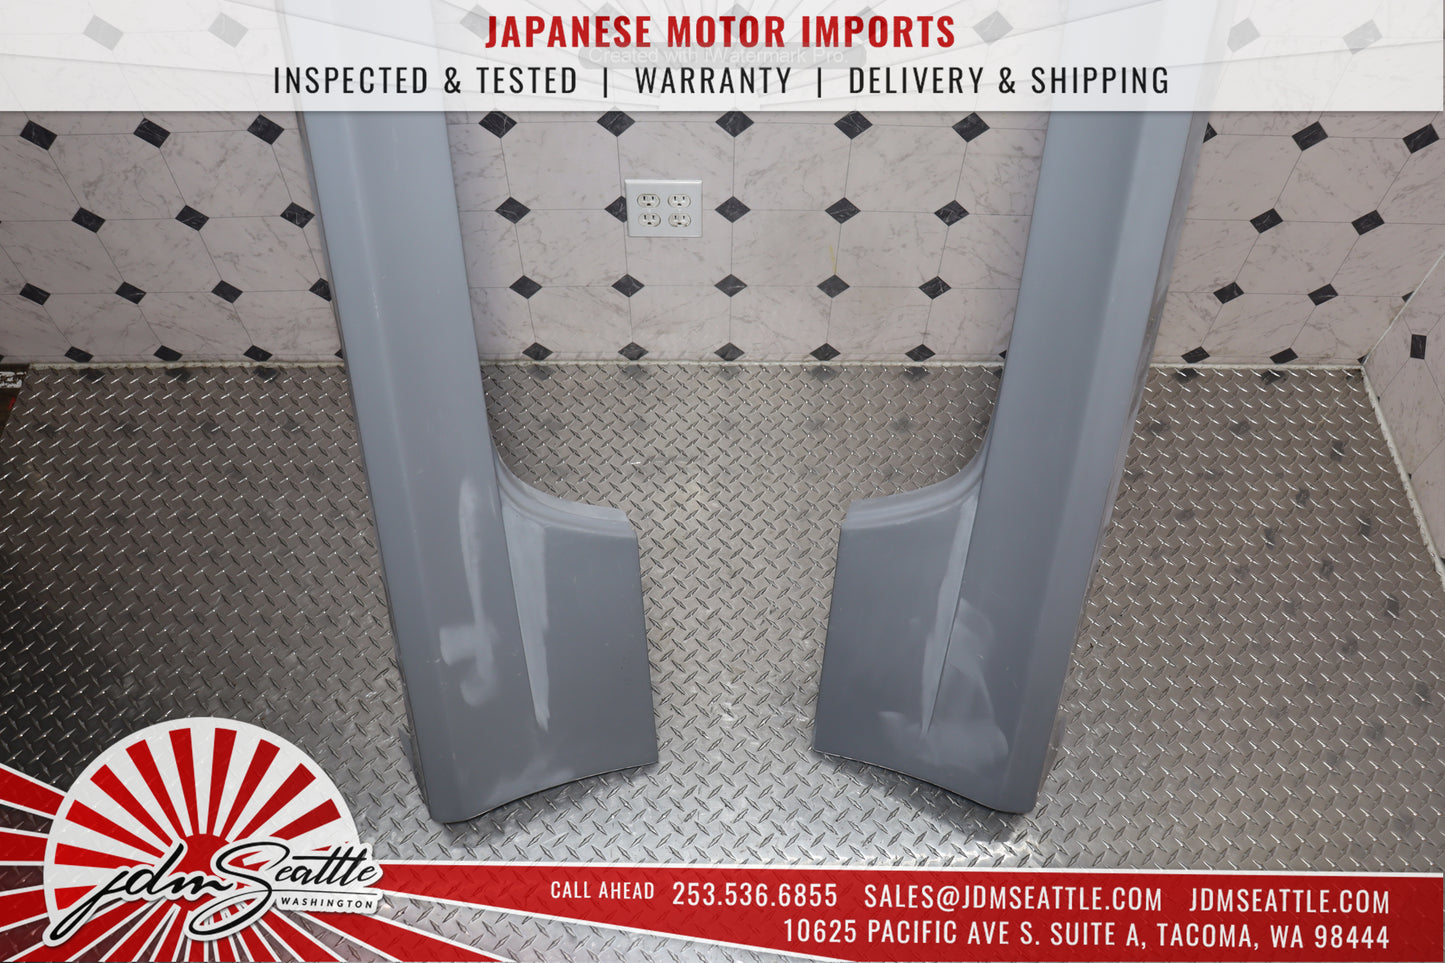 *NEW* JDM MK2 TOYOTA CHASER JZX100 S1 BODY KIT FRONT / REAR BUMPERS & SIDE SKIRTS